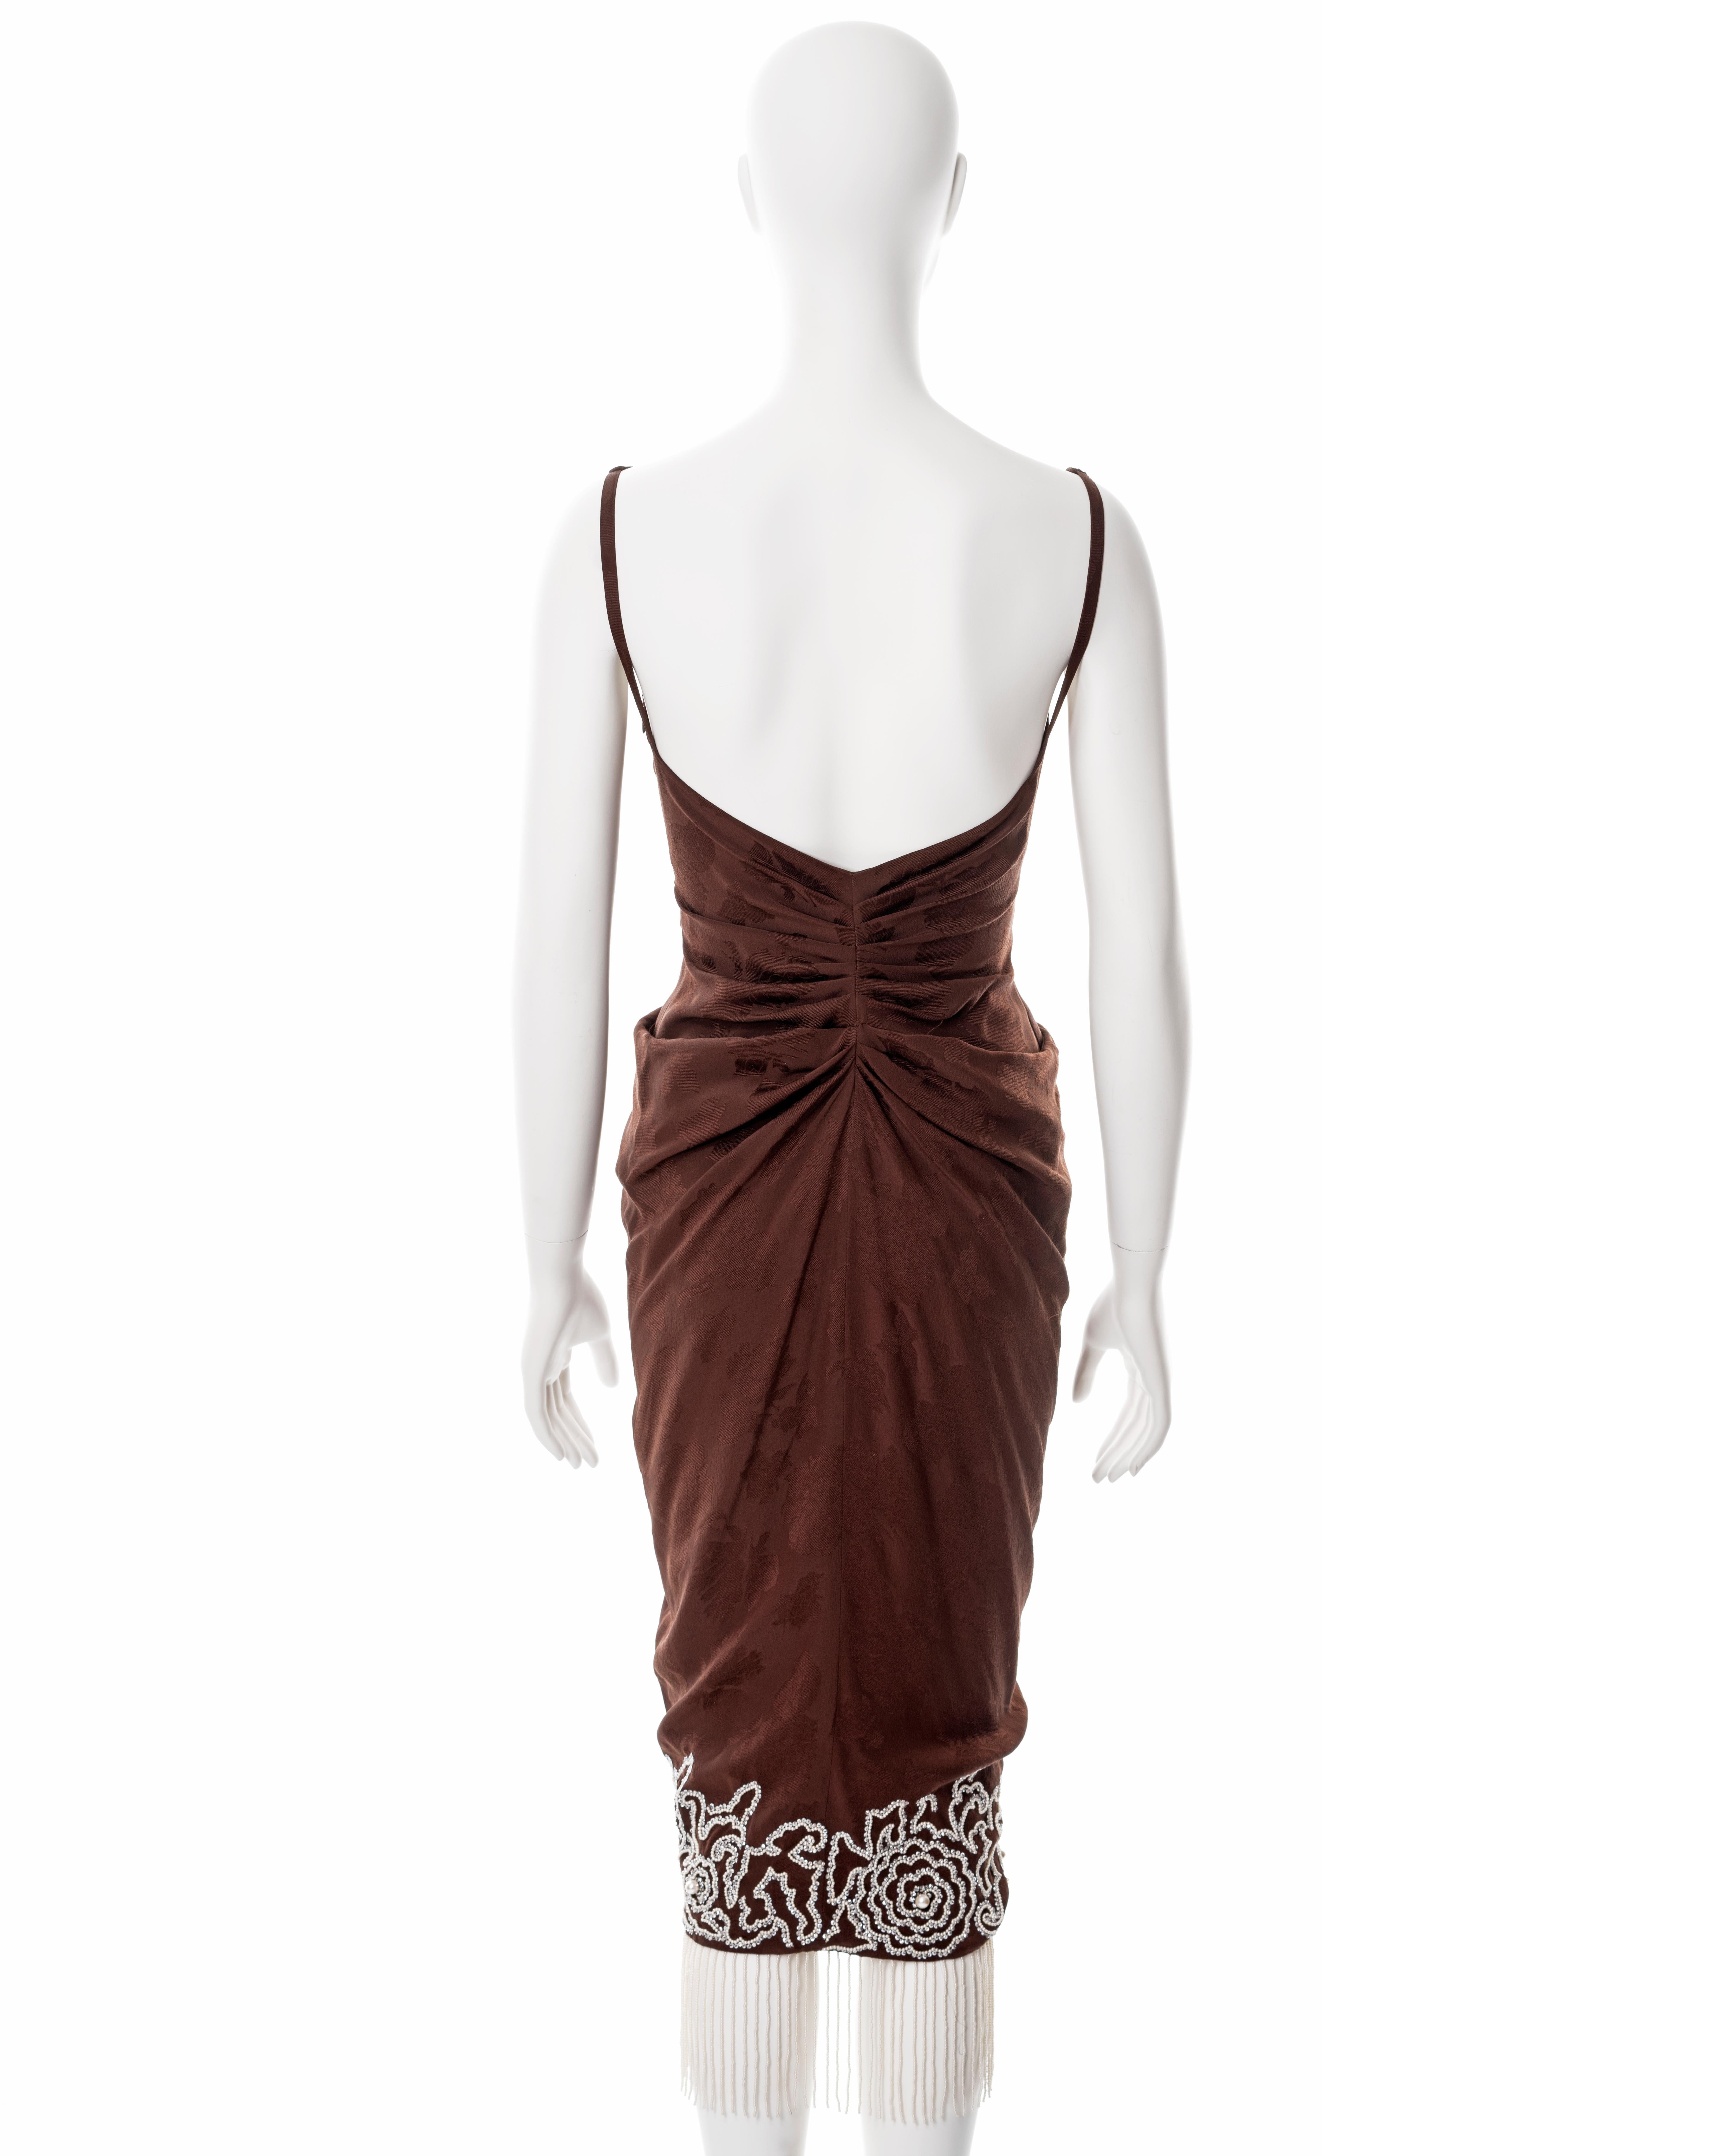 Christian Dior by John Galliano pearl beaded brown silk cocktail dress, ss 2008 For Sale 3